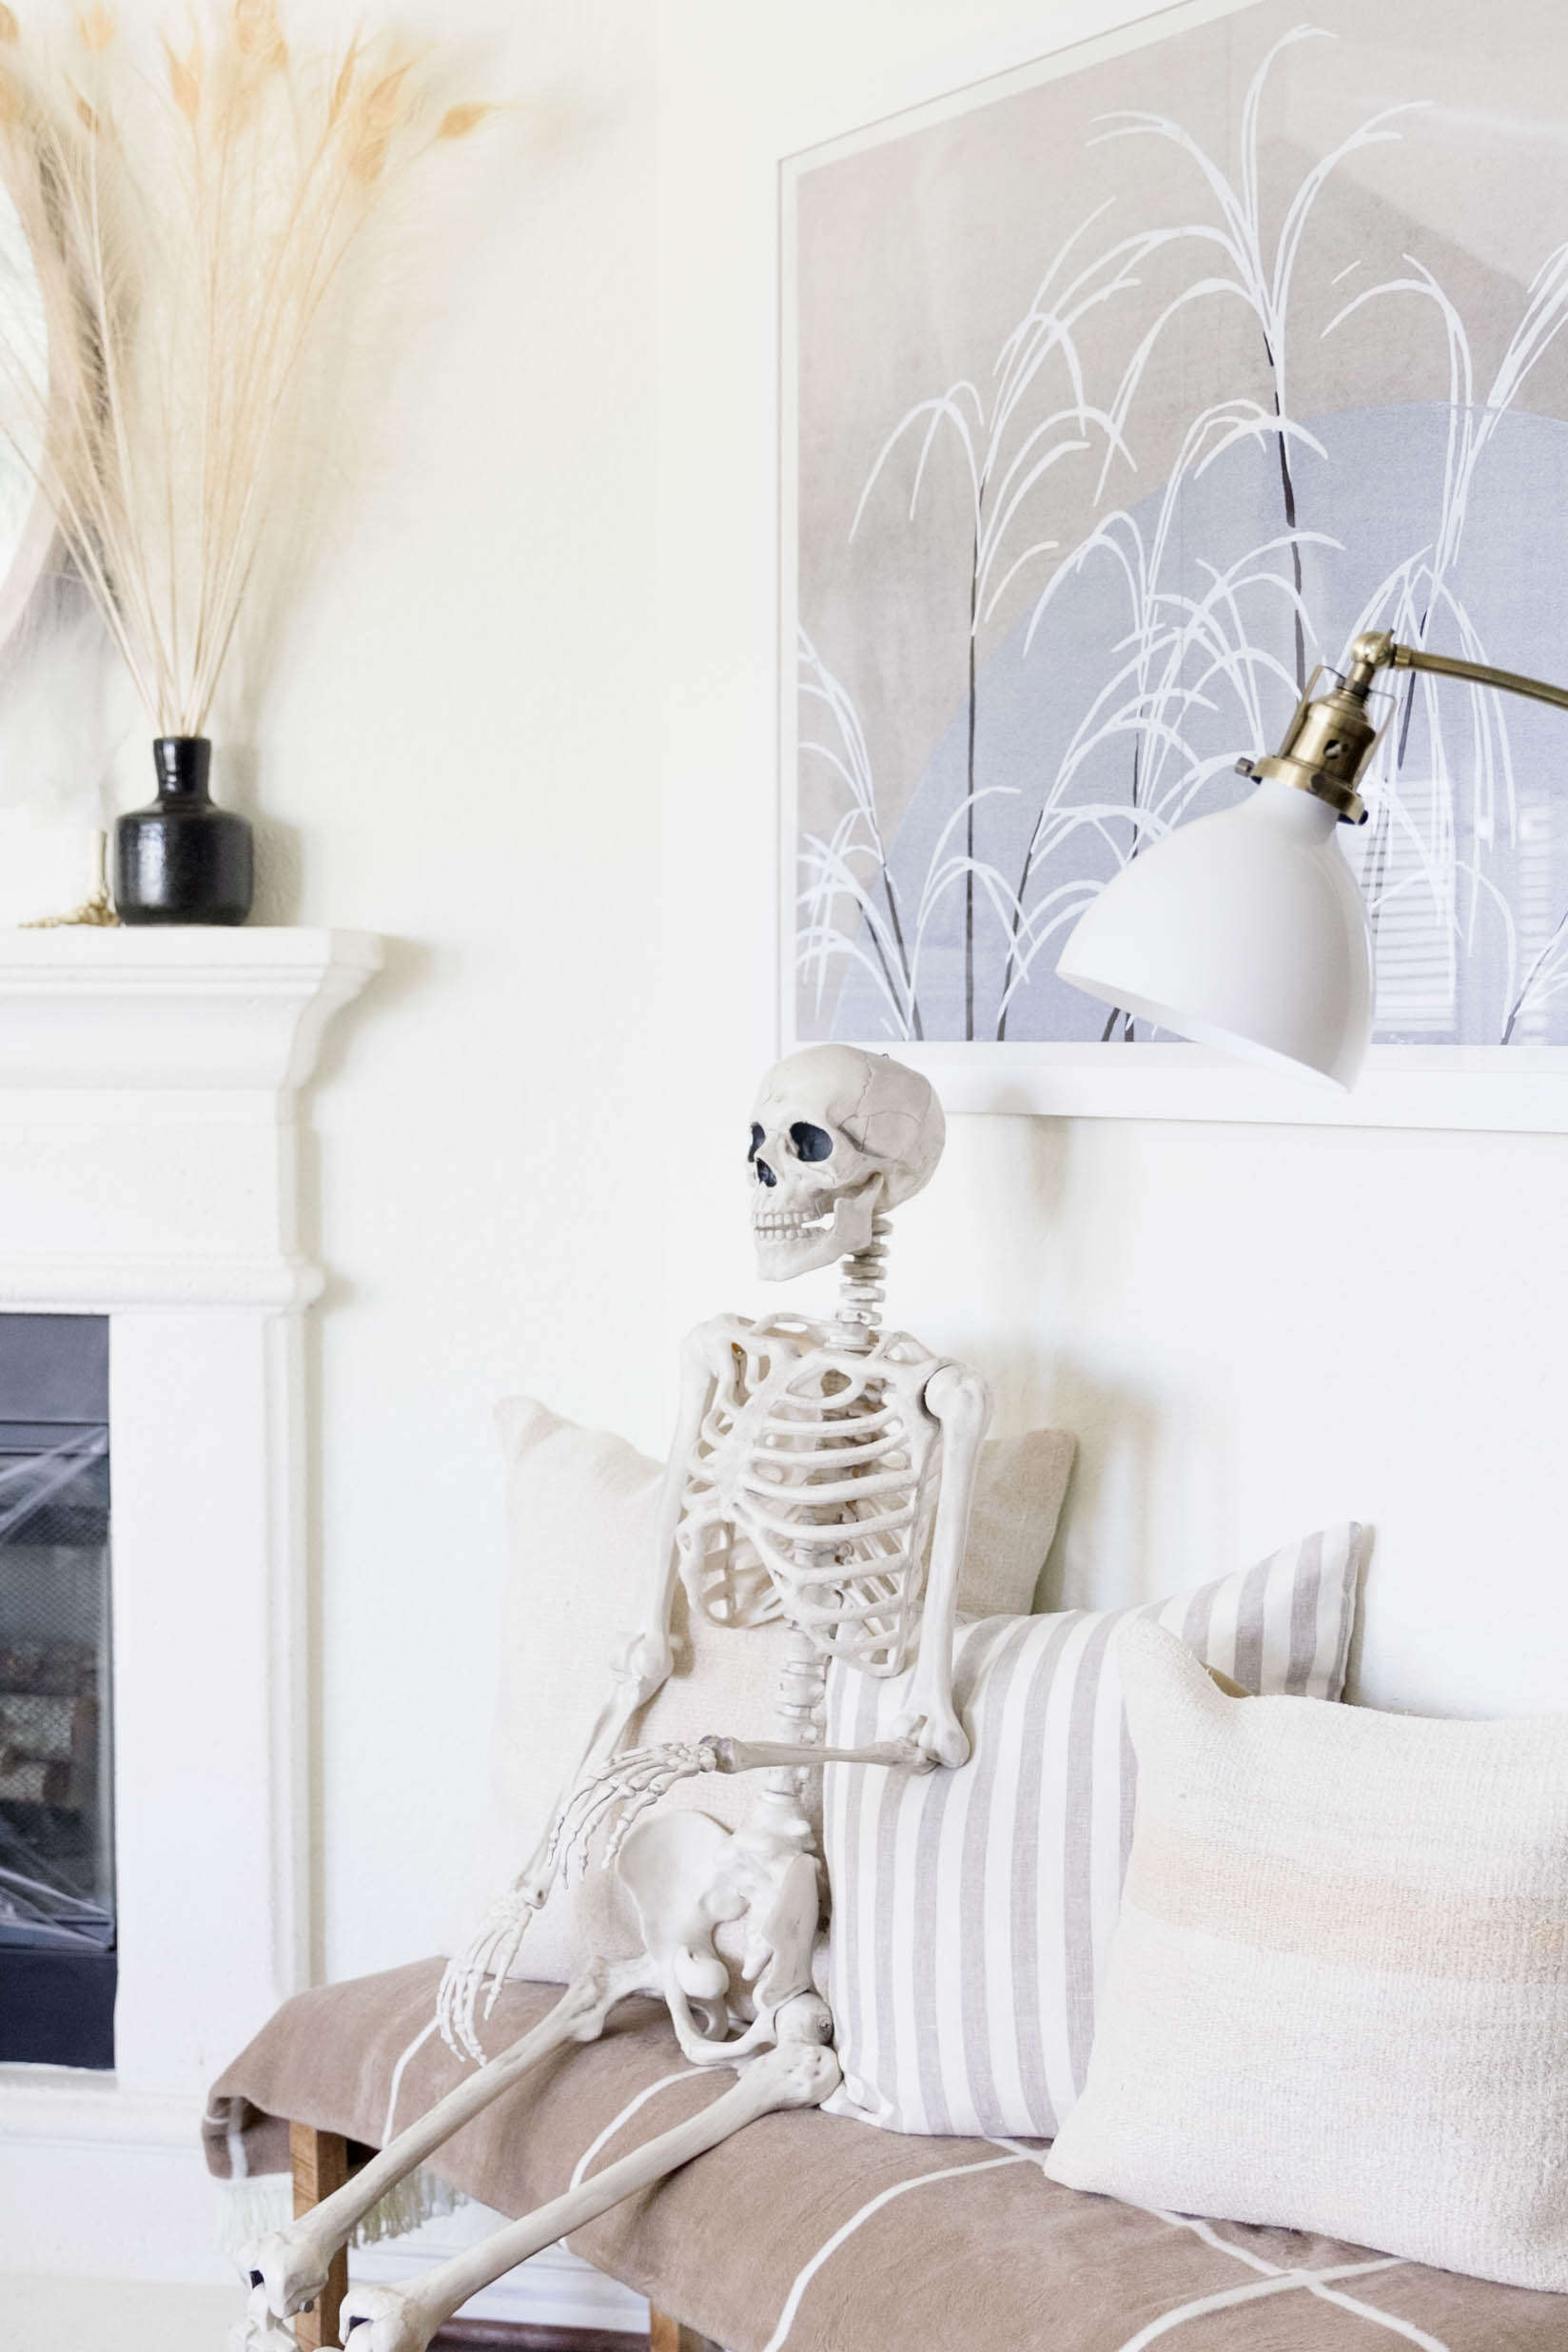 Simple Halloween Decorations for the Home-Life Size Skeleton